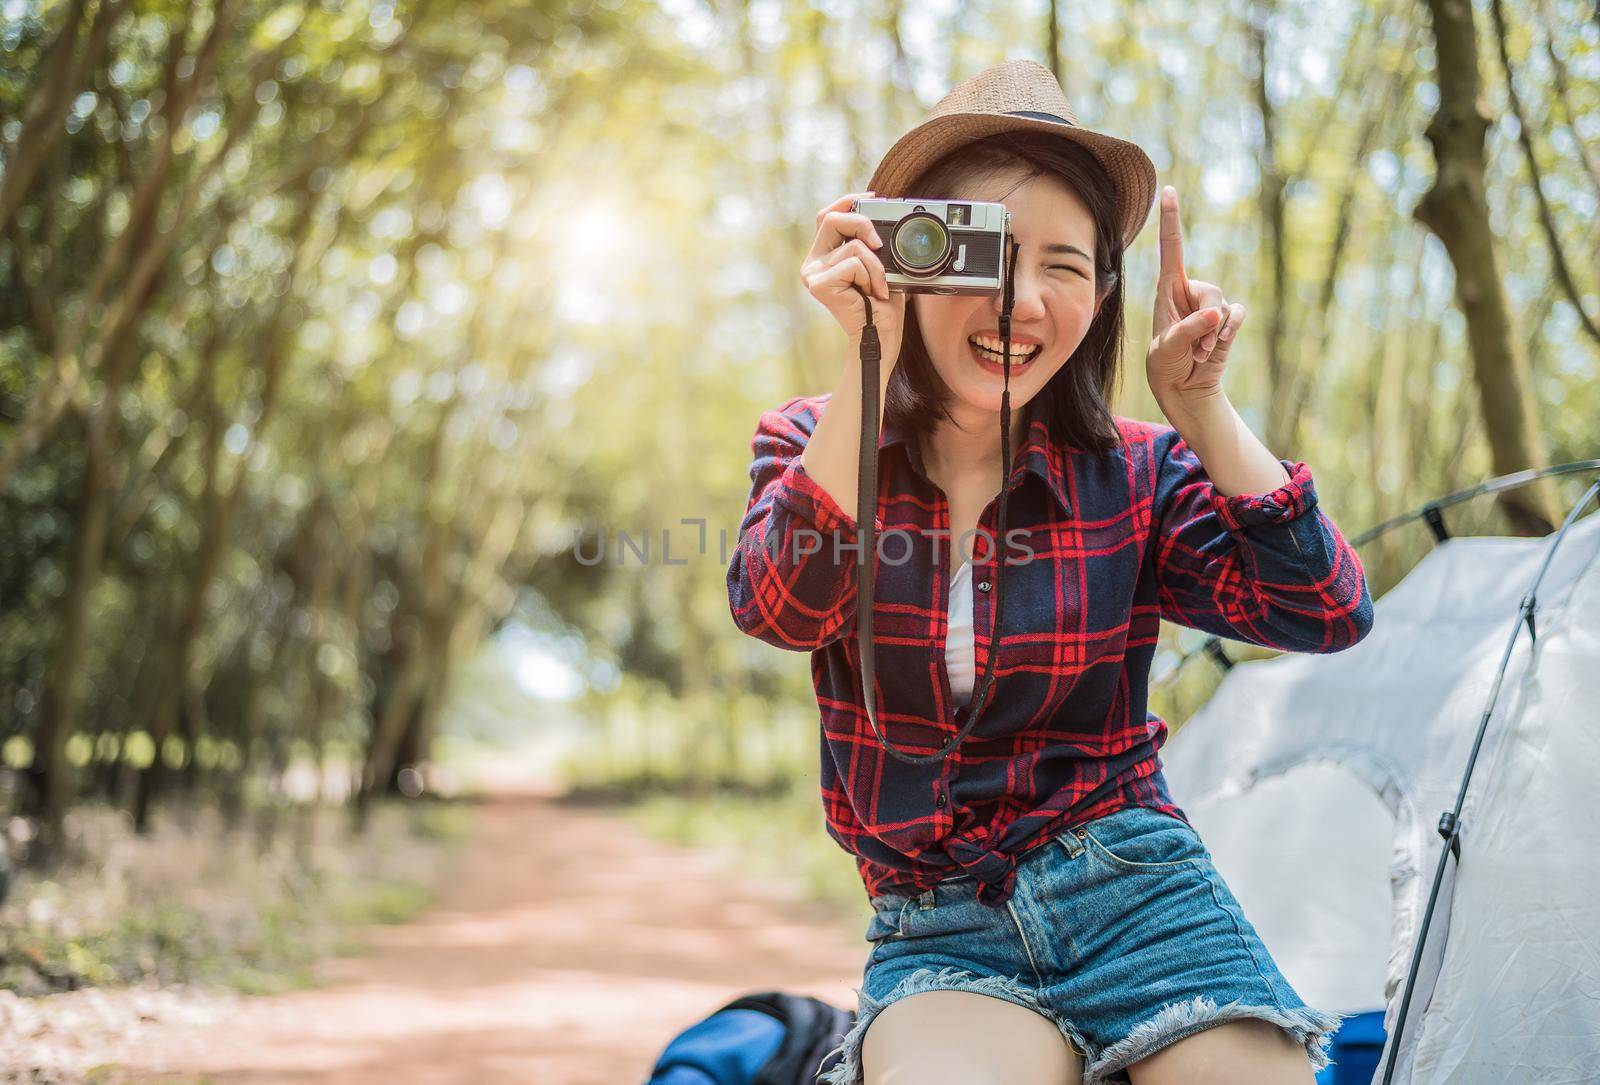 Asian beauty traveler taking photograph by digital cemera while hiking camping. Adventure and leisure activity concept. Happy life and technology theme. Solo girl theme. by MiniStocker